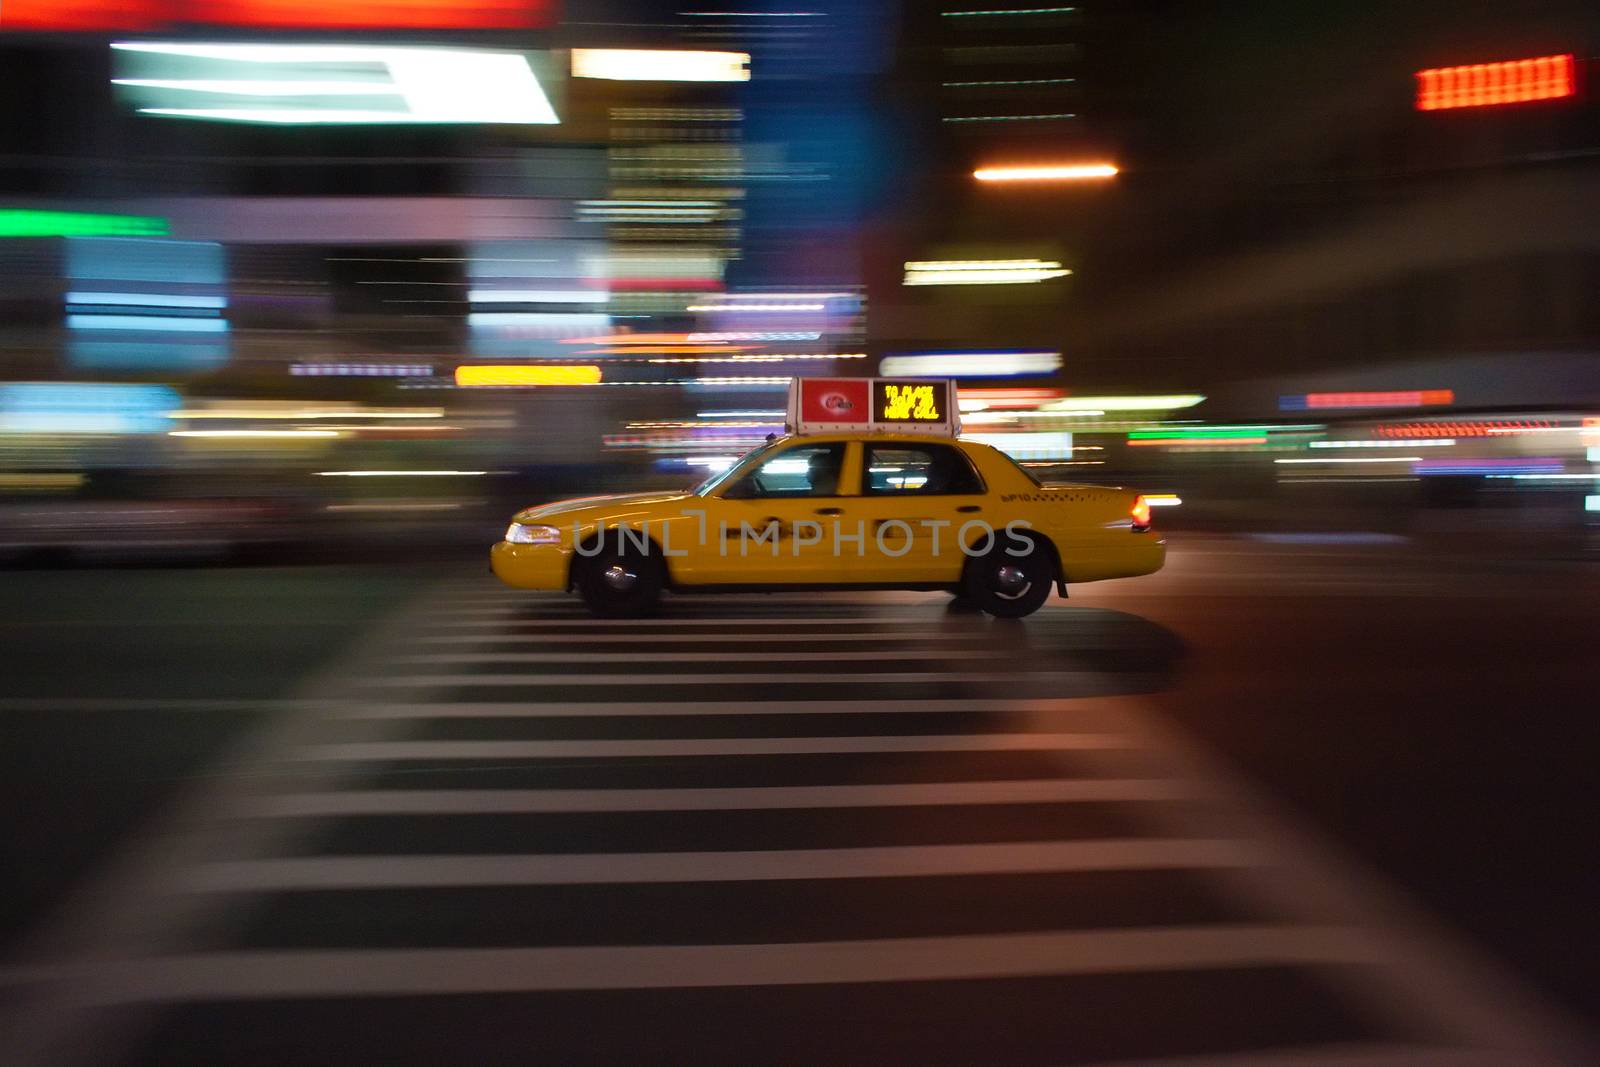 New-York taxi blazes through the night by totony